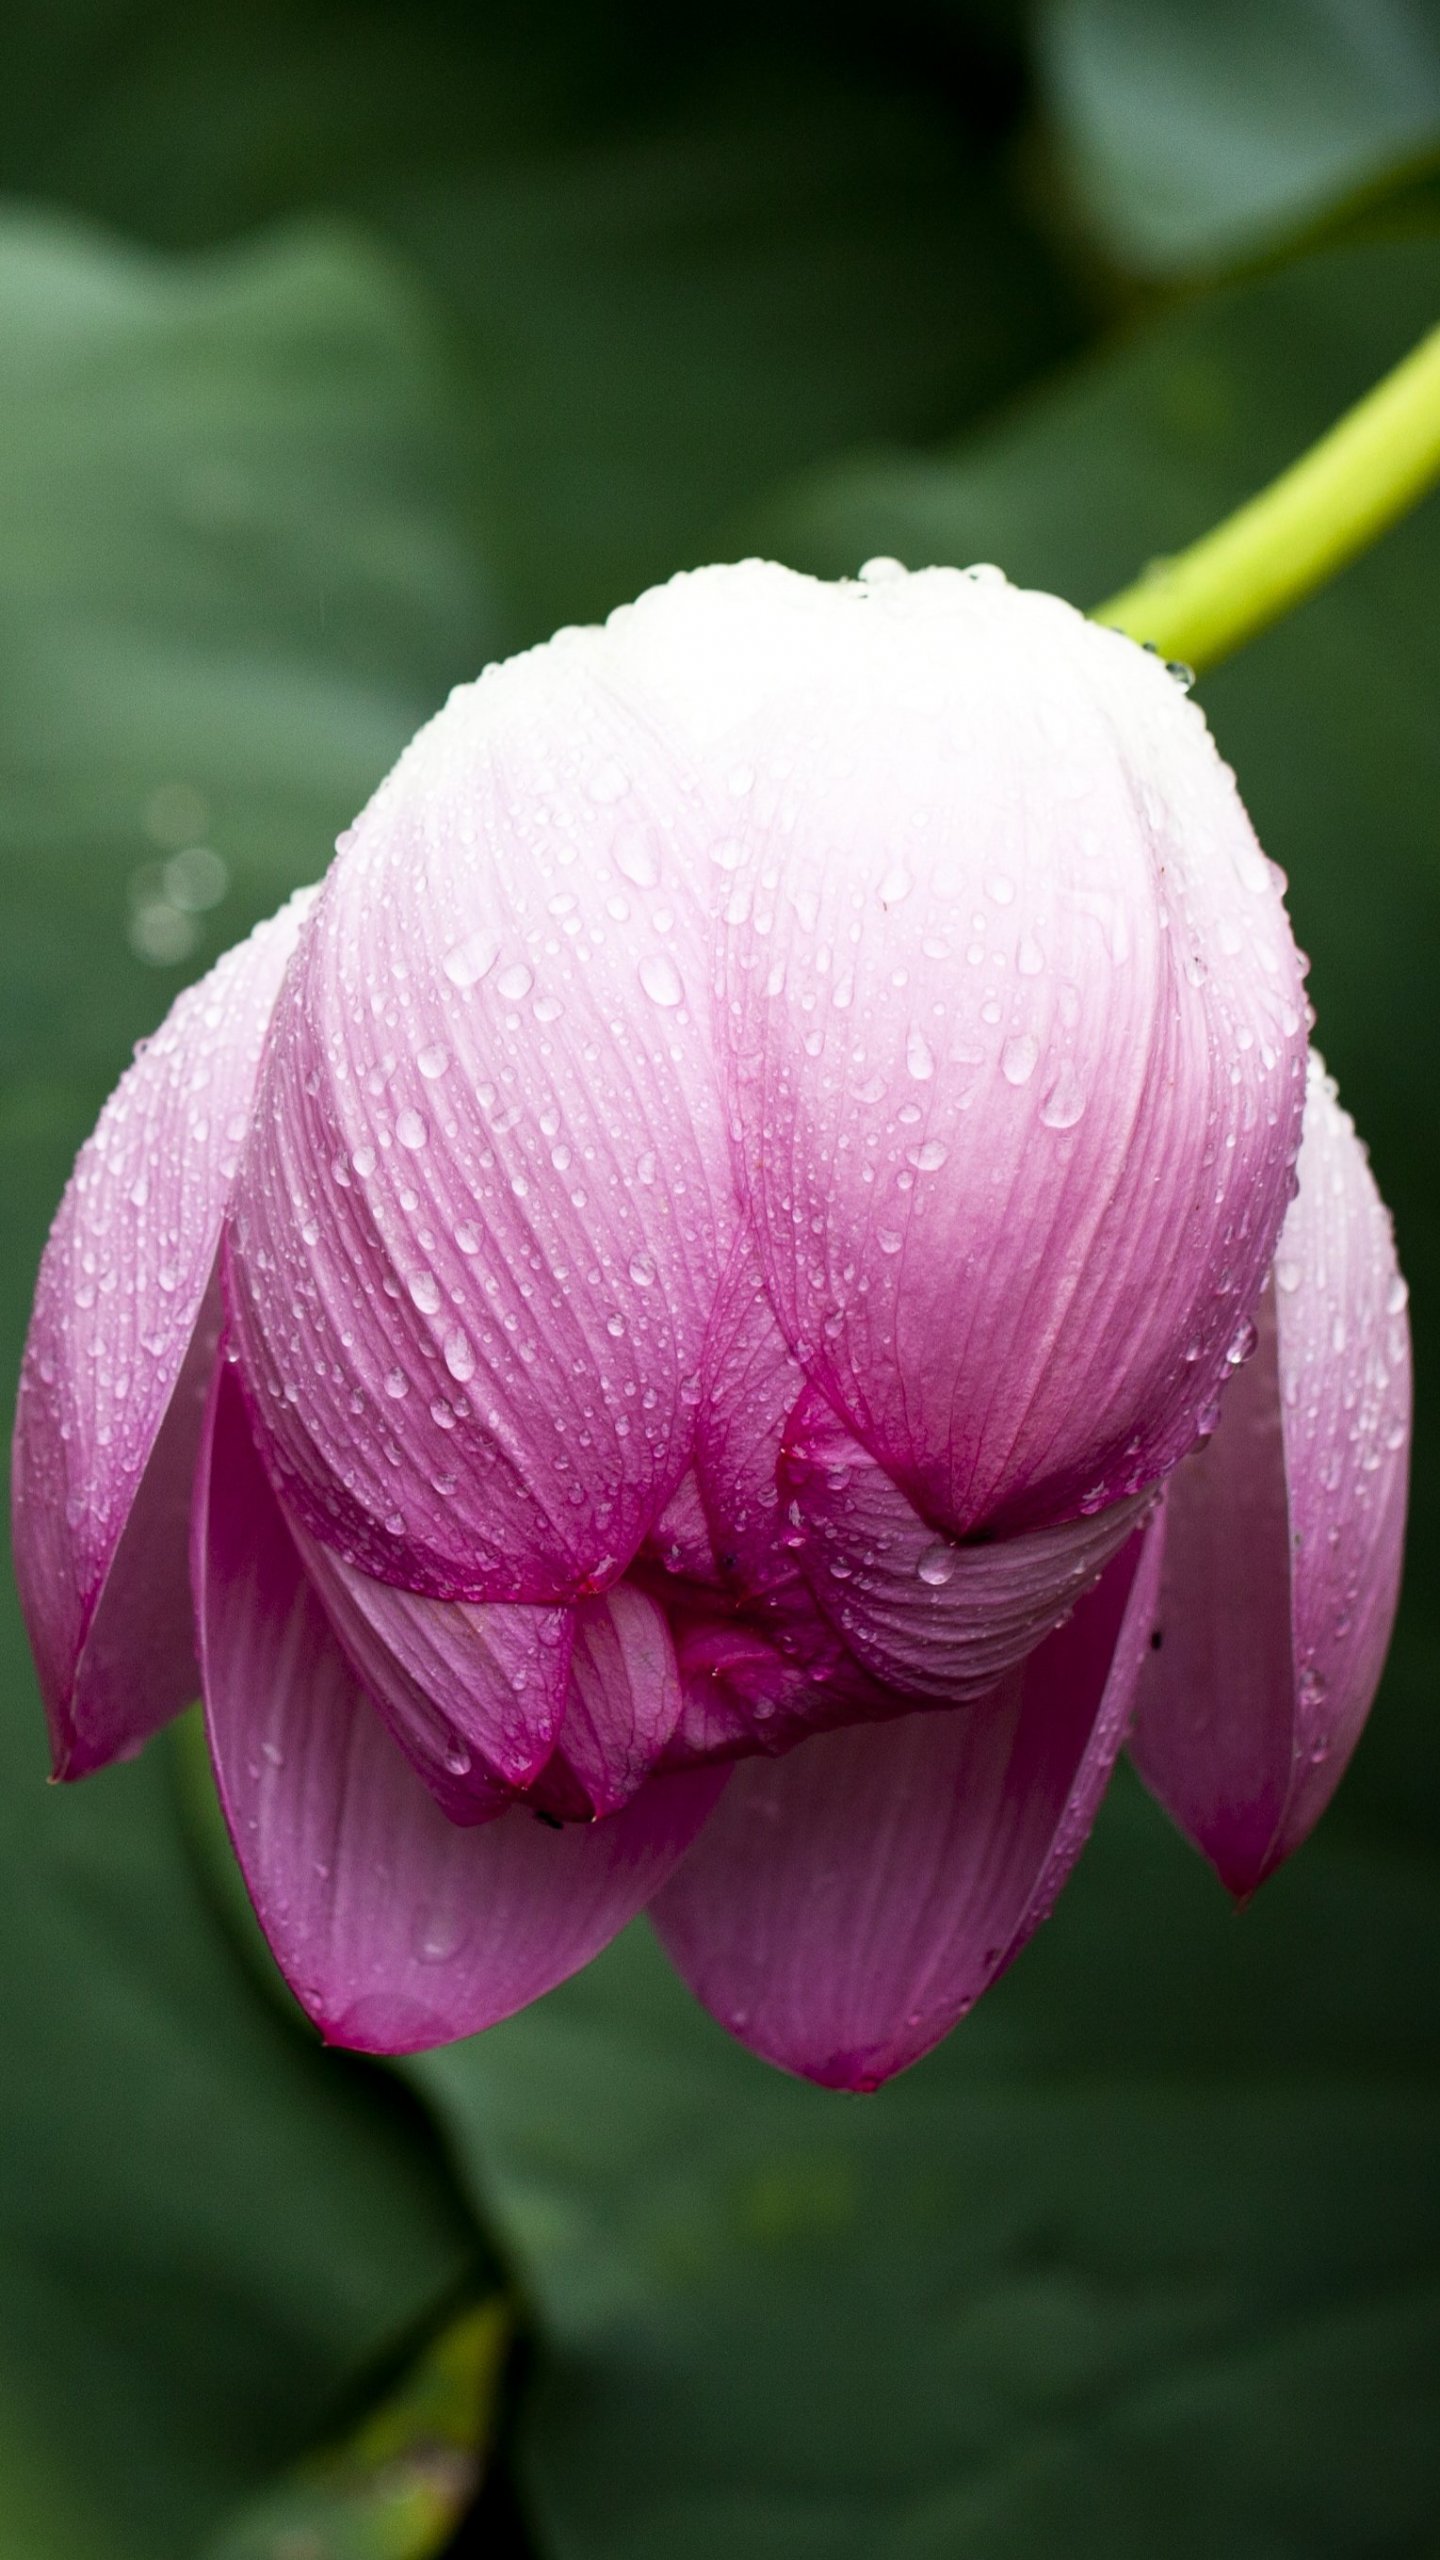 Lotus Leaf In Rain - Quotes For Environmental Care , HD Wallpaper & Backgrounds